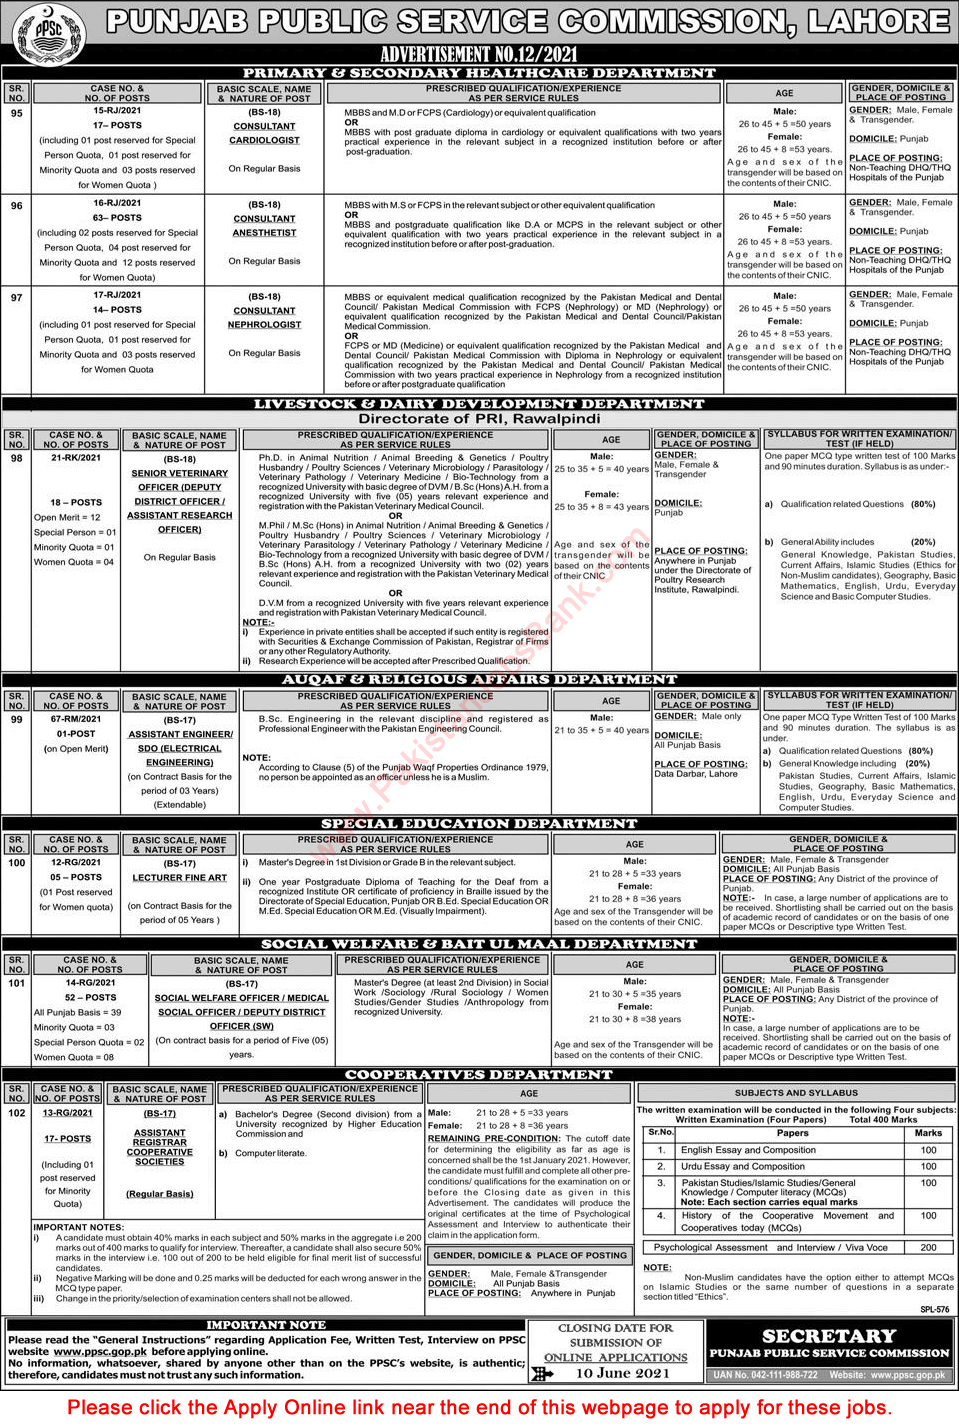 PPSC Jobs May 2021 Consolidated Advertisement No 12/2021 Apply Online Latest